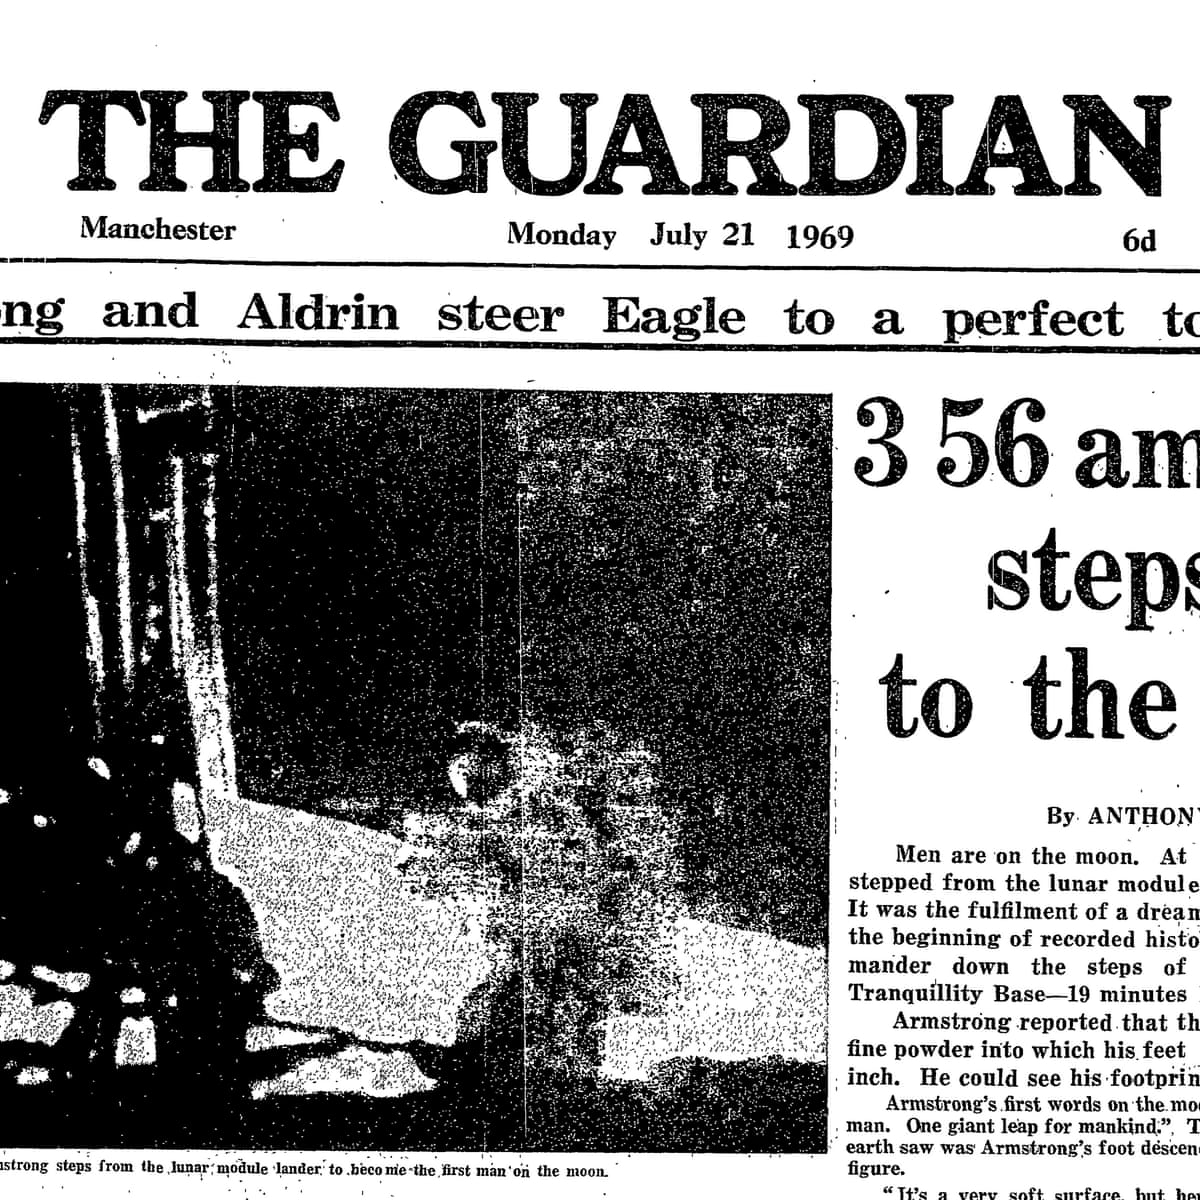 Man walks on the moon: 21 July 1969 | The Guardian Foundation ...